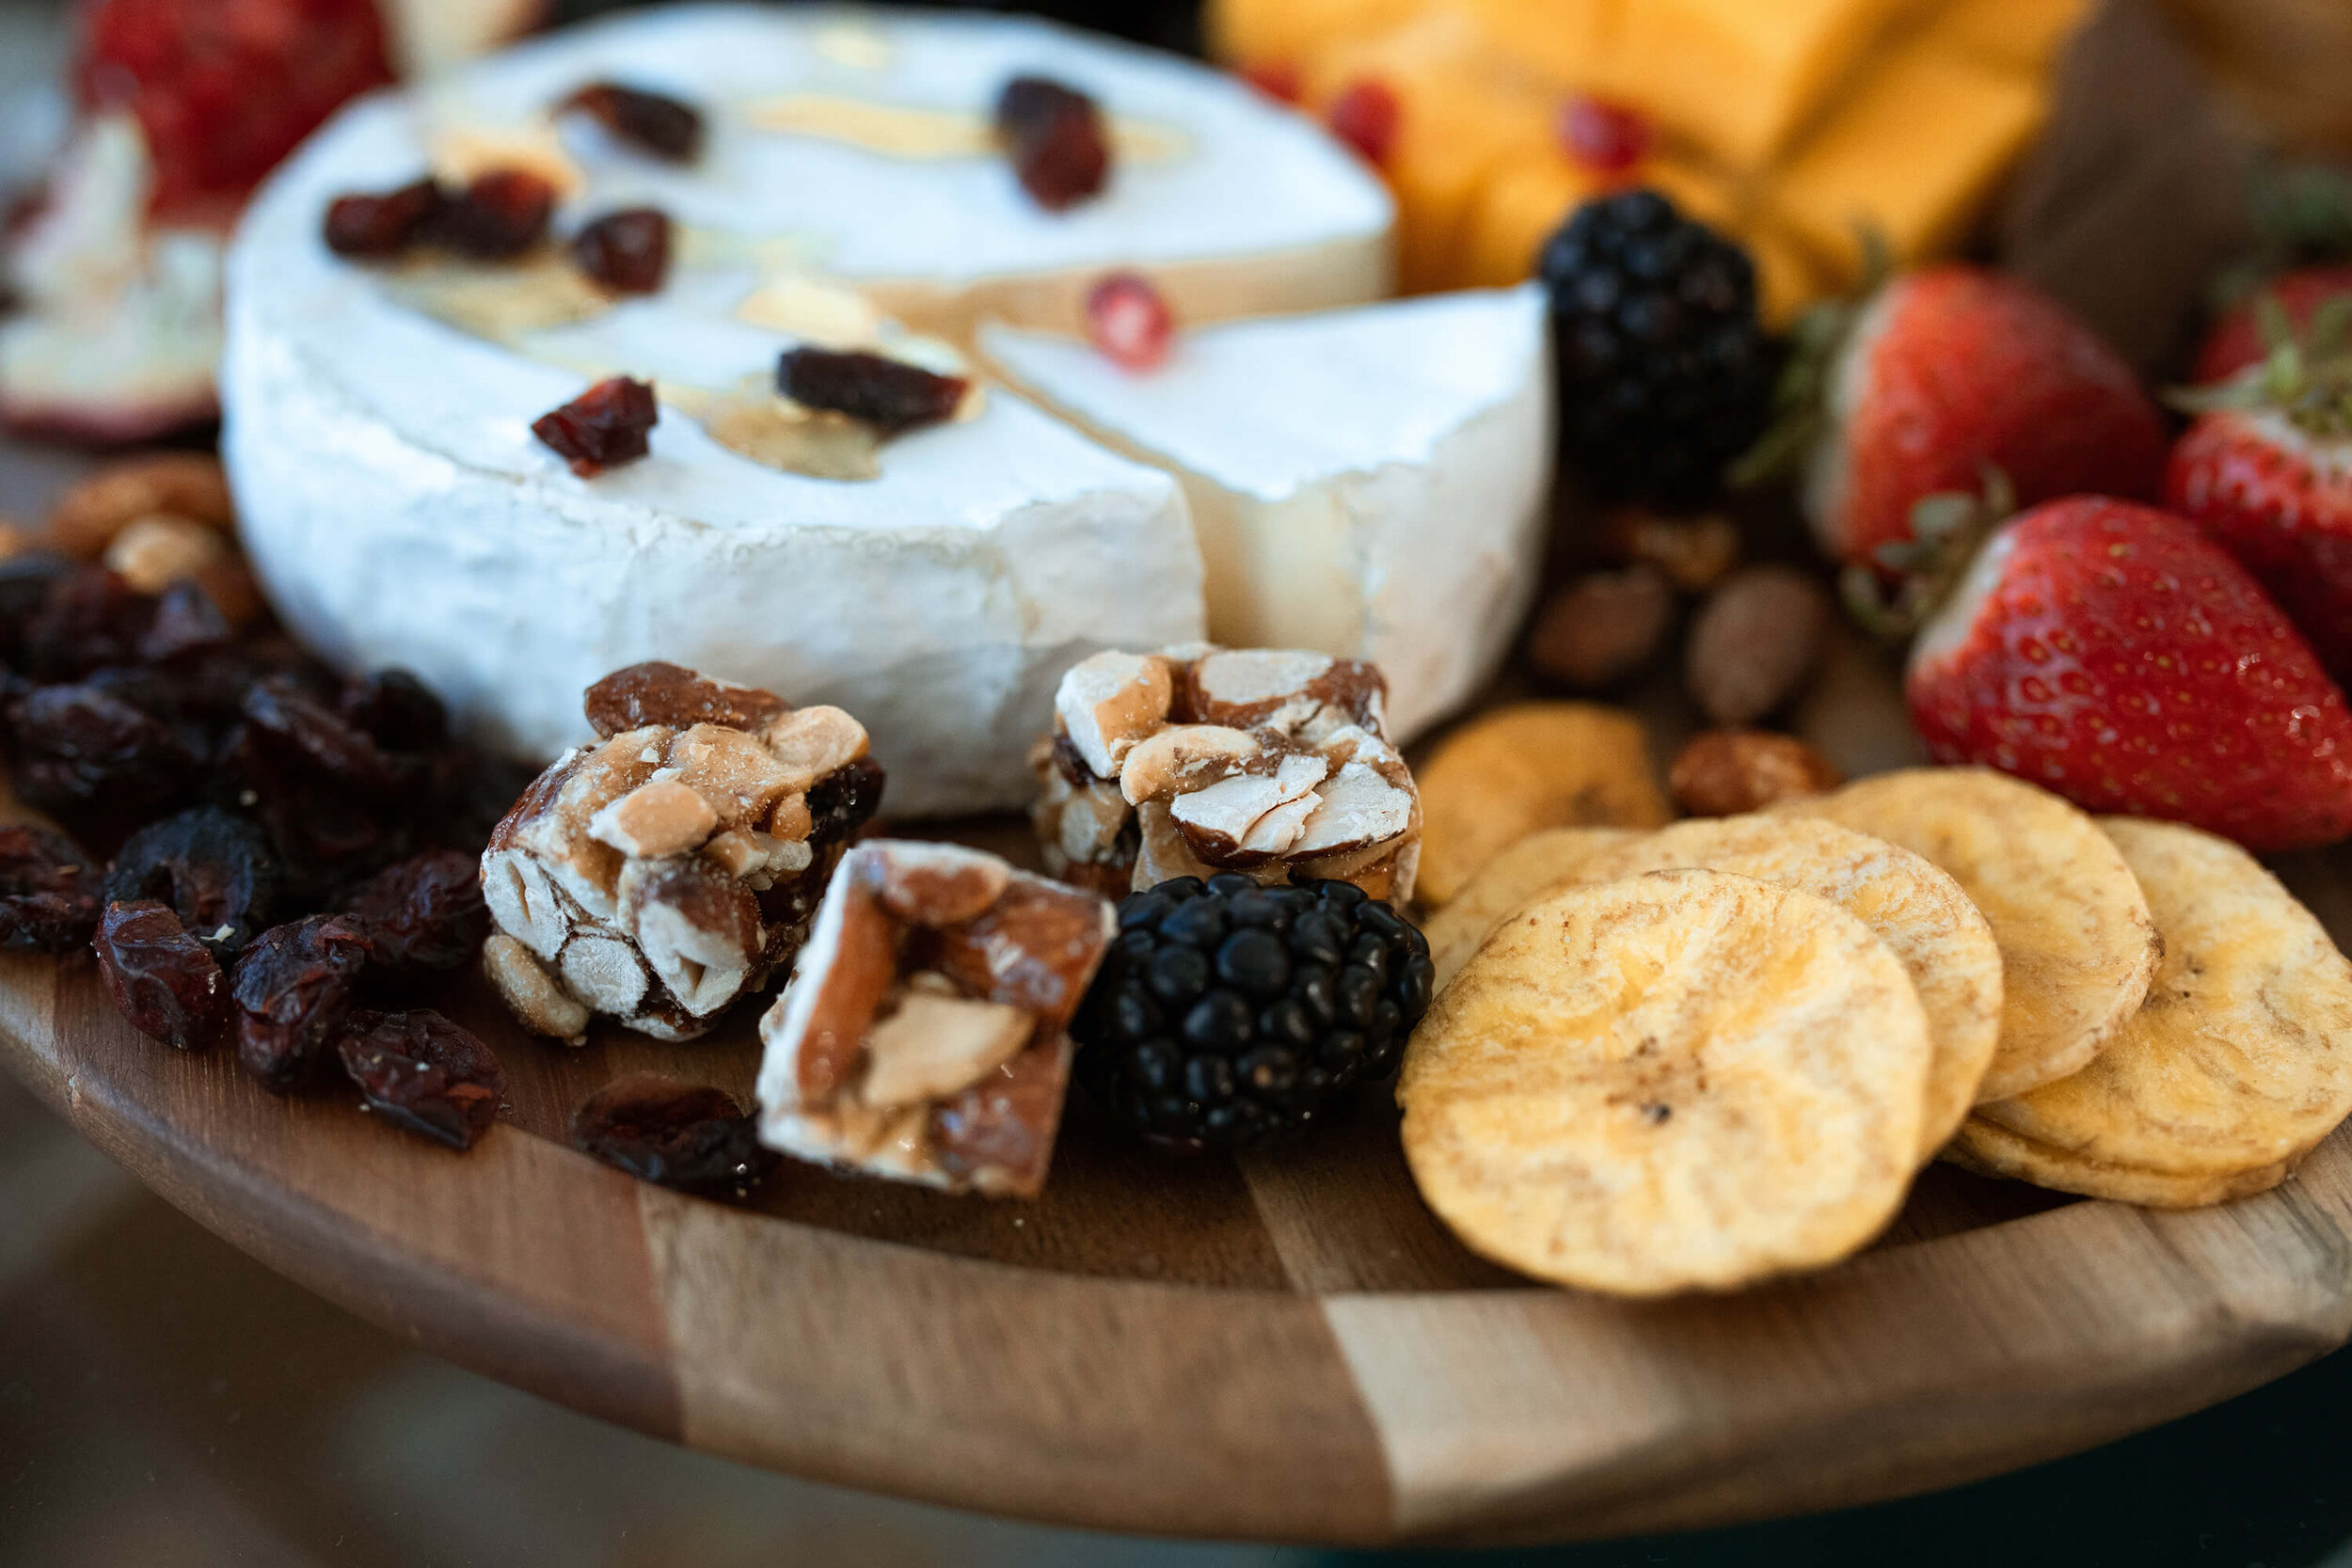 Social - cheese-and-charcuterie Menu - Jaynes Gourmet Catering & Event Planning - Toronto - 3.jpg